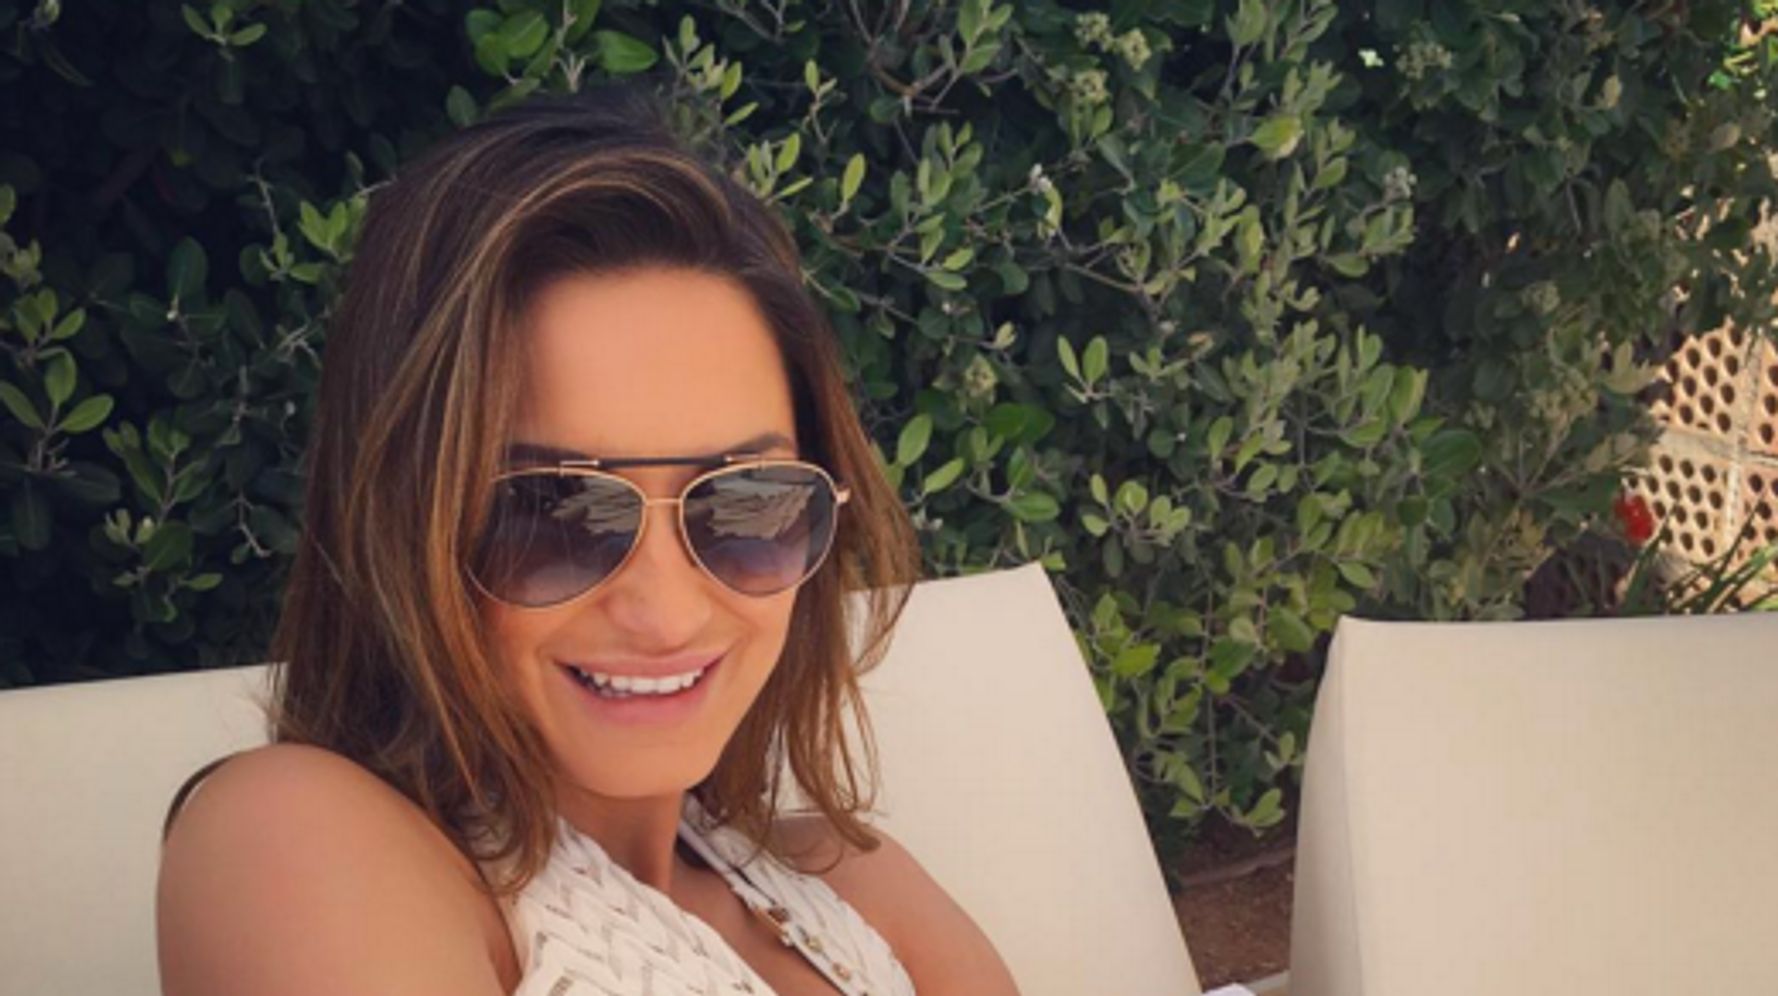 Sam Faiers Praised For Normalising Breastfeeding With Touching Snap